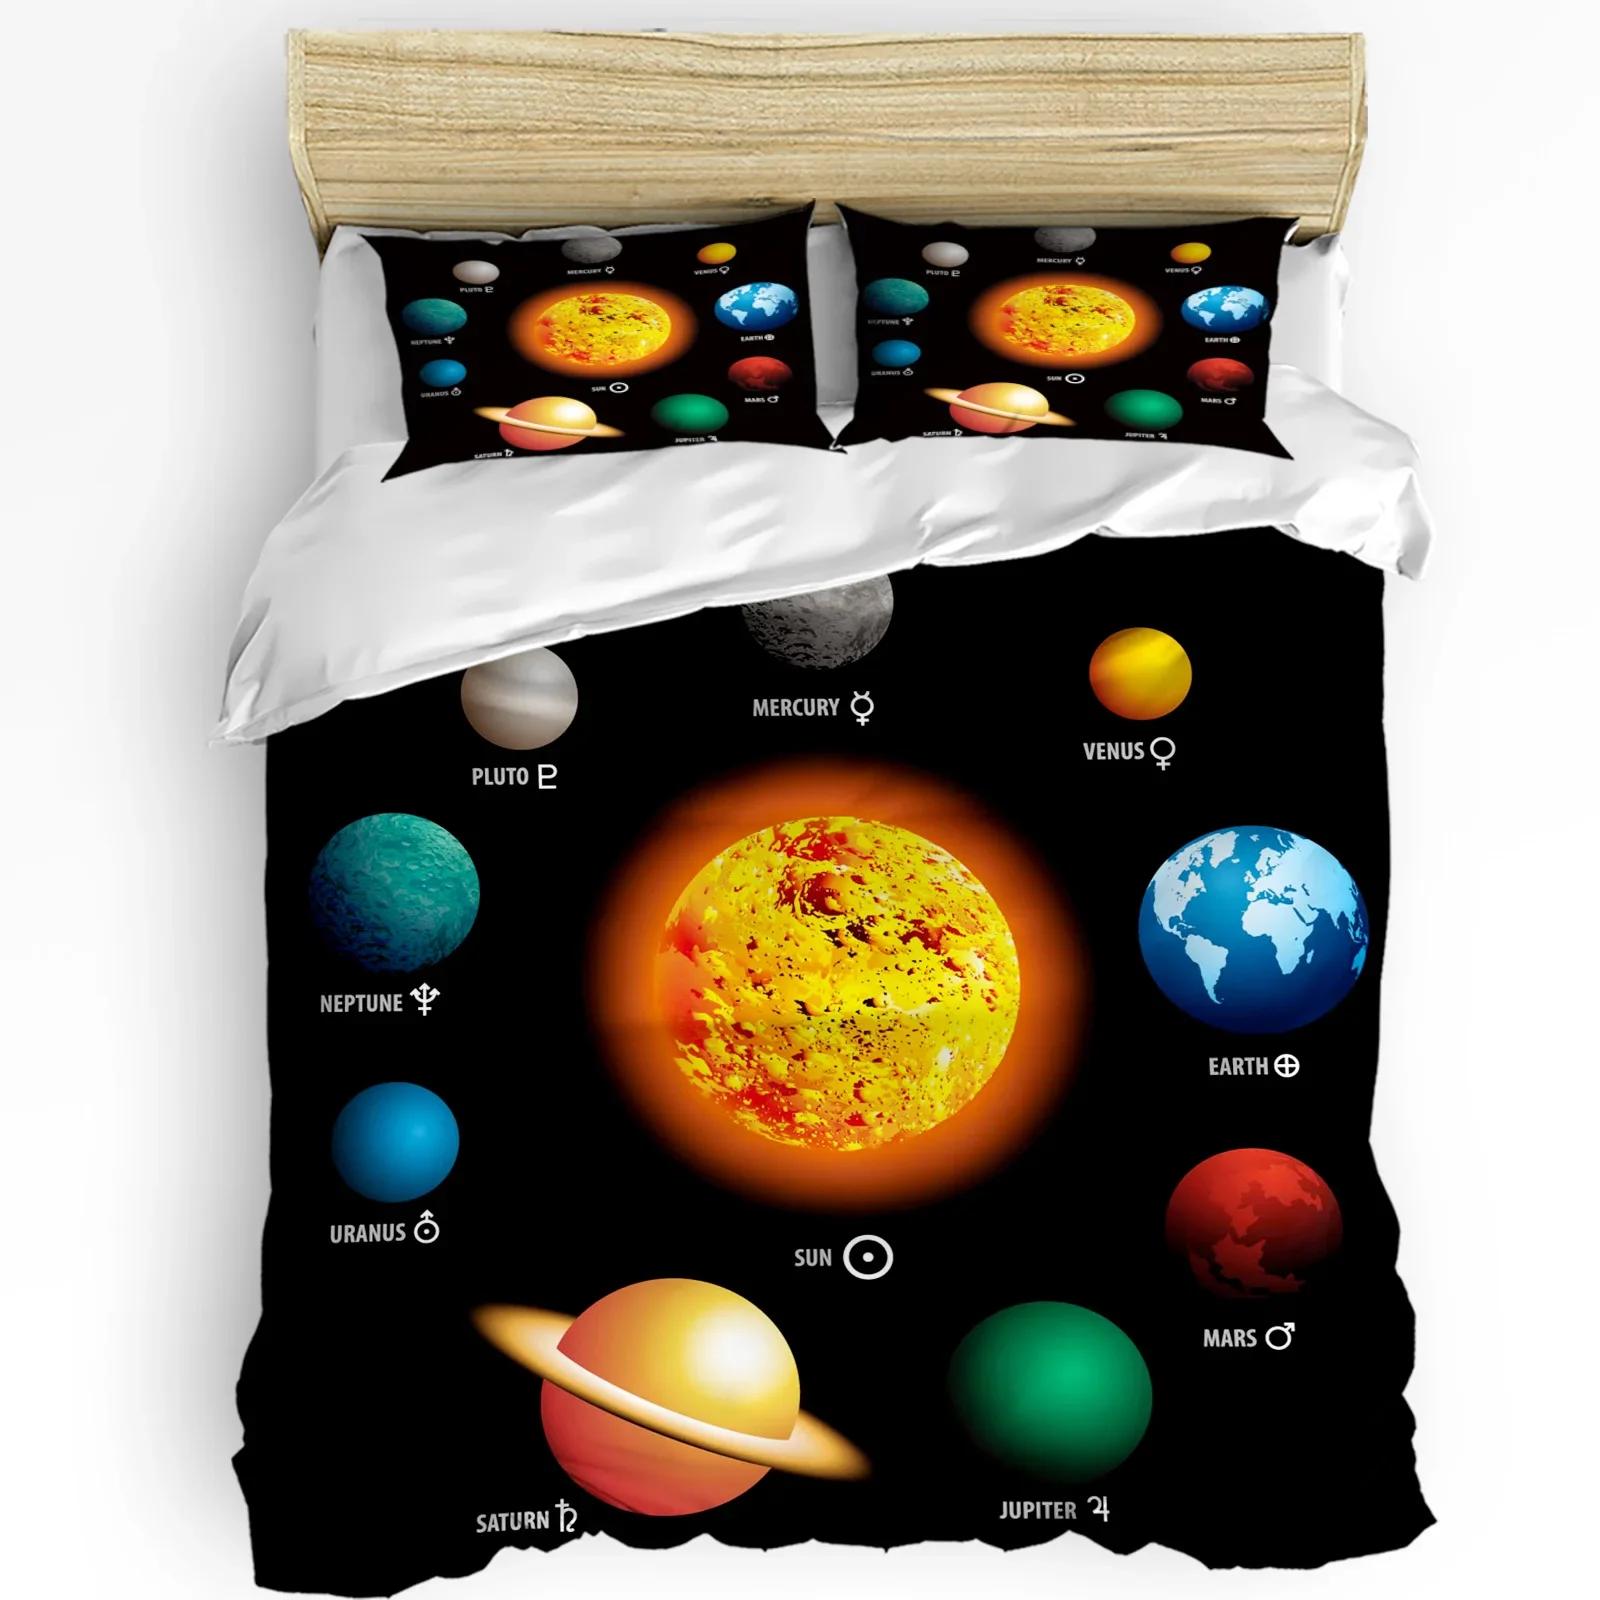 Planetary System Printed Comfort Duvet Cover Pillow Case Home Textile Quilt Cover Boy Kid Teen Girl Luxury 3pcs Bedd